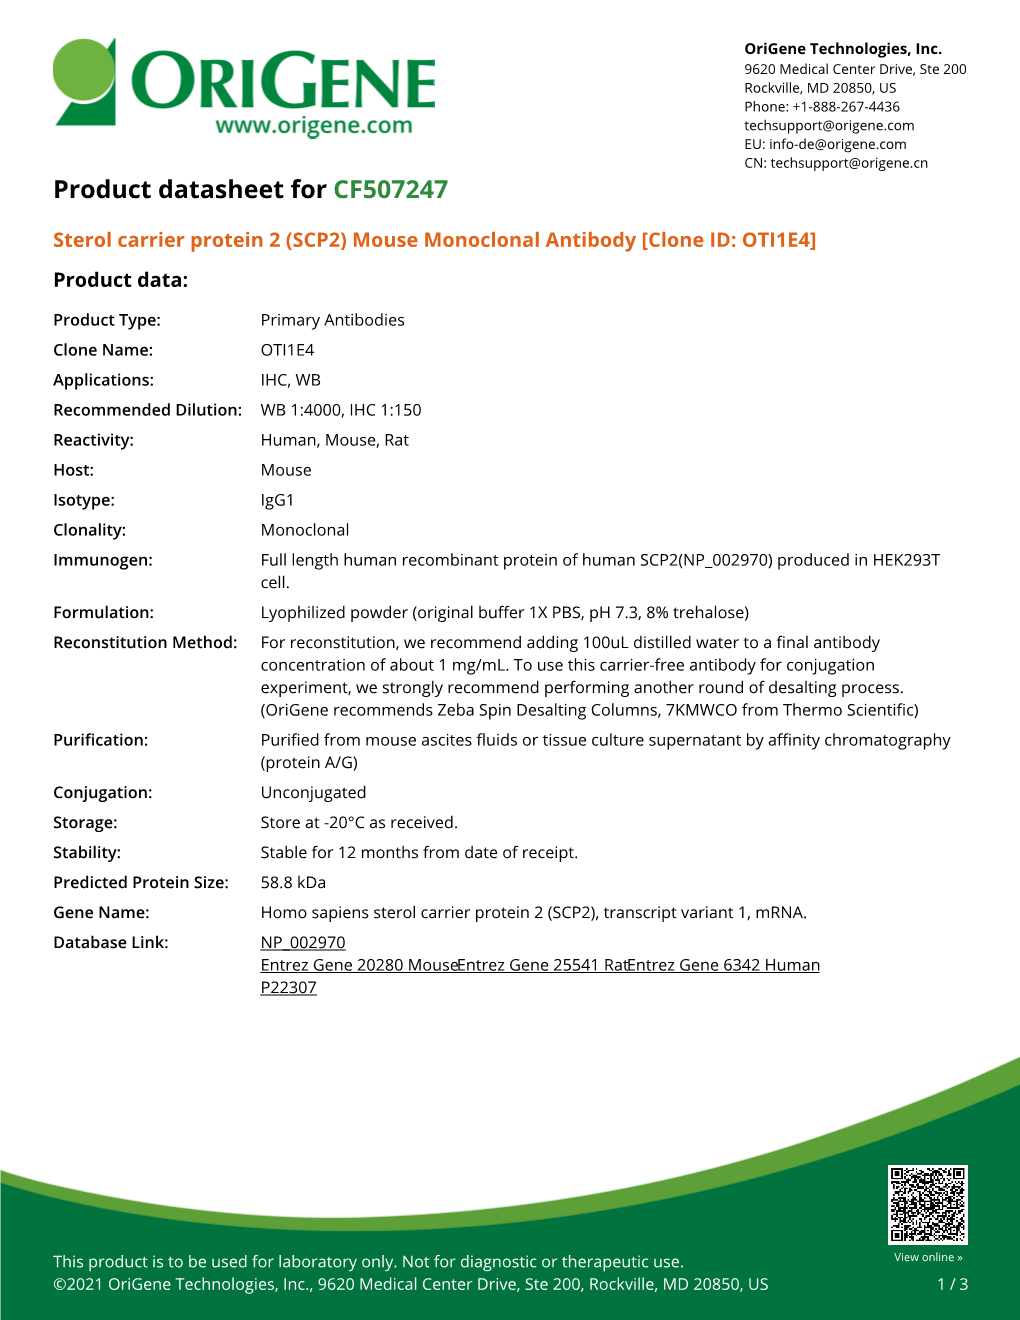 Sterol Carrier Protein 2 (SCP2) Mouse Monoclonal Antibody [Clone ID: OTI1E4] Product Data